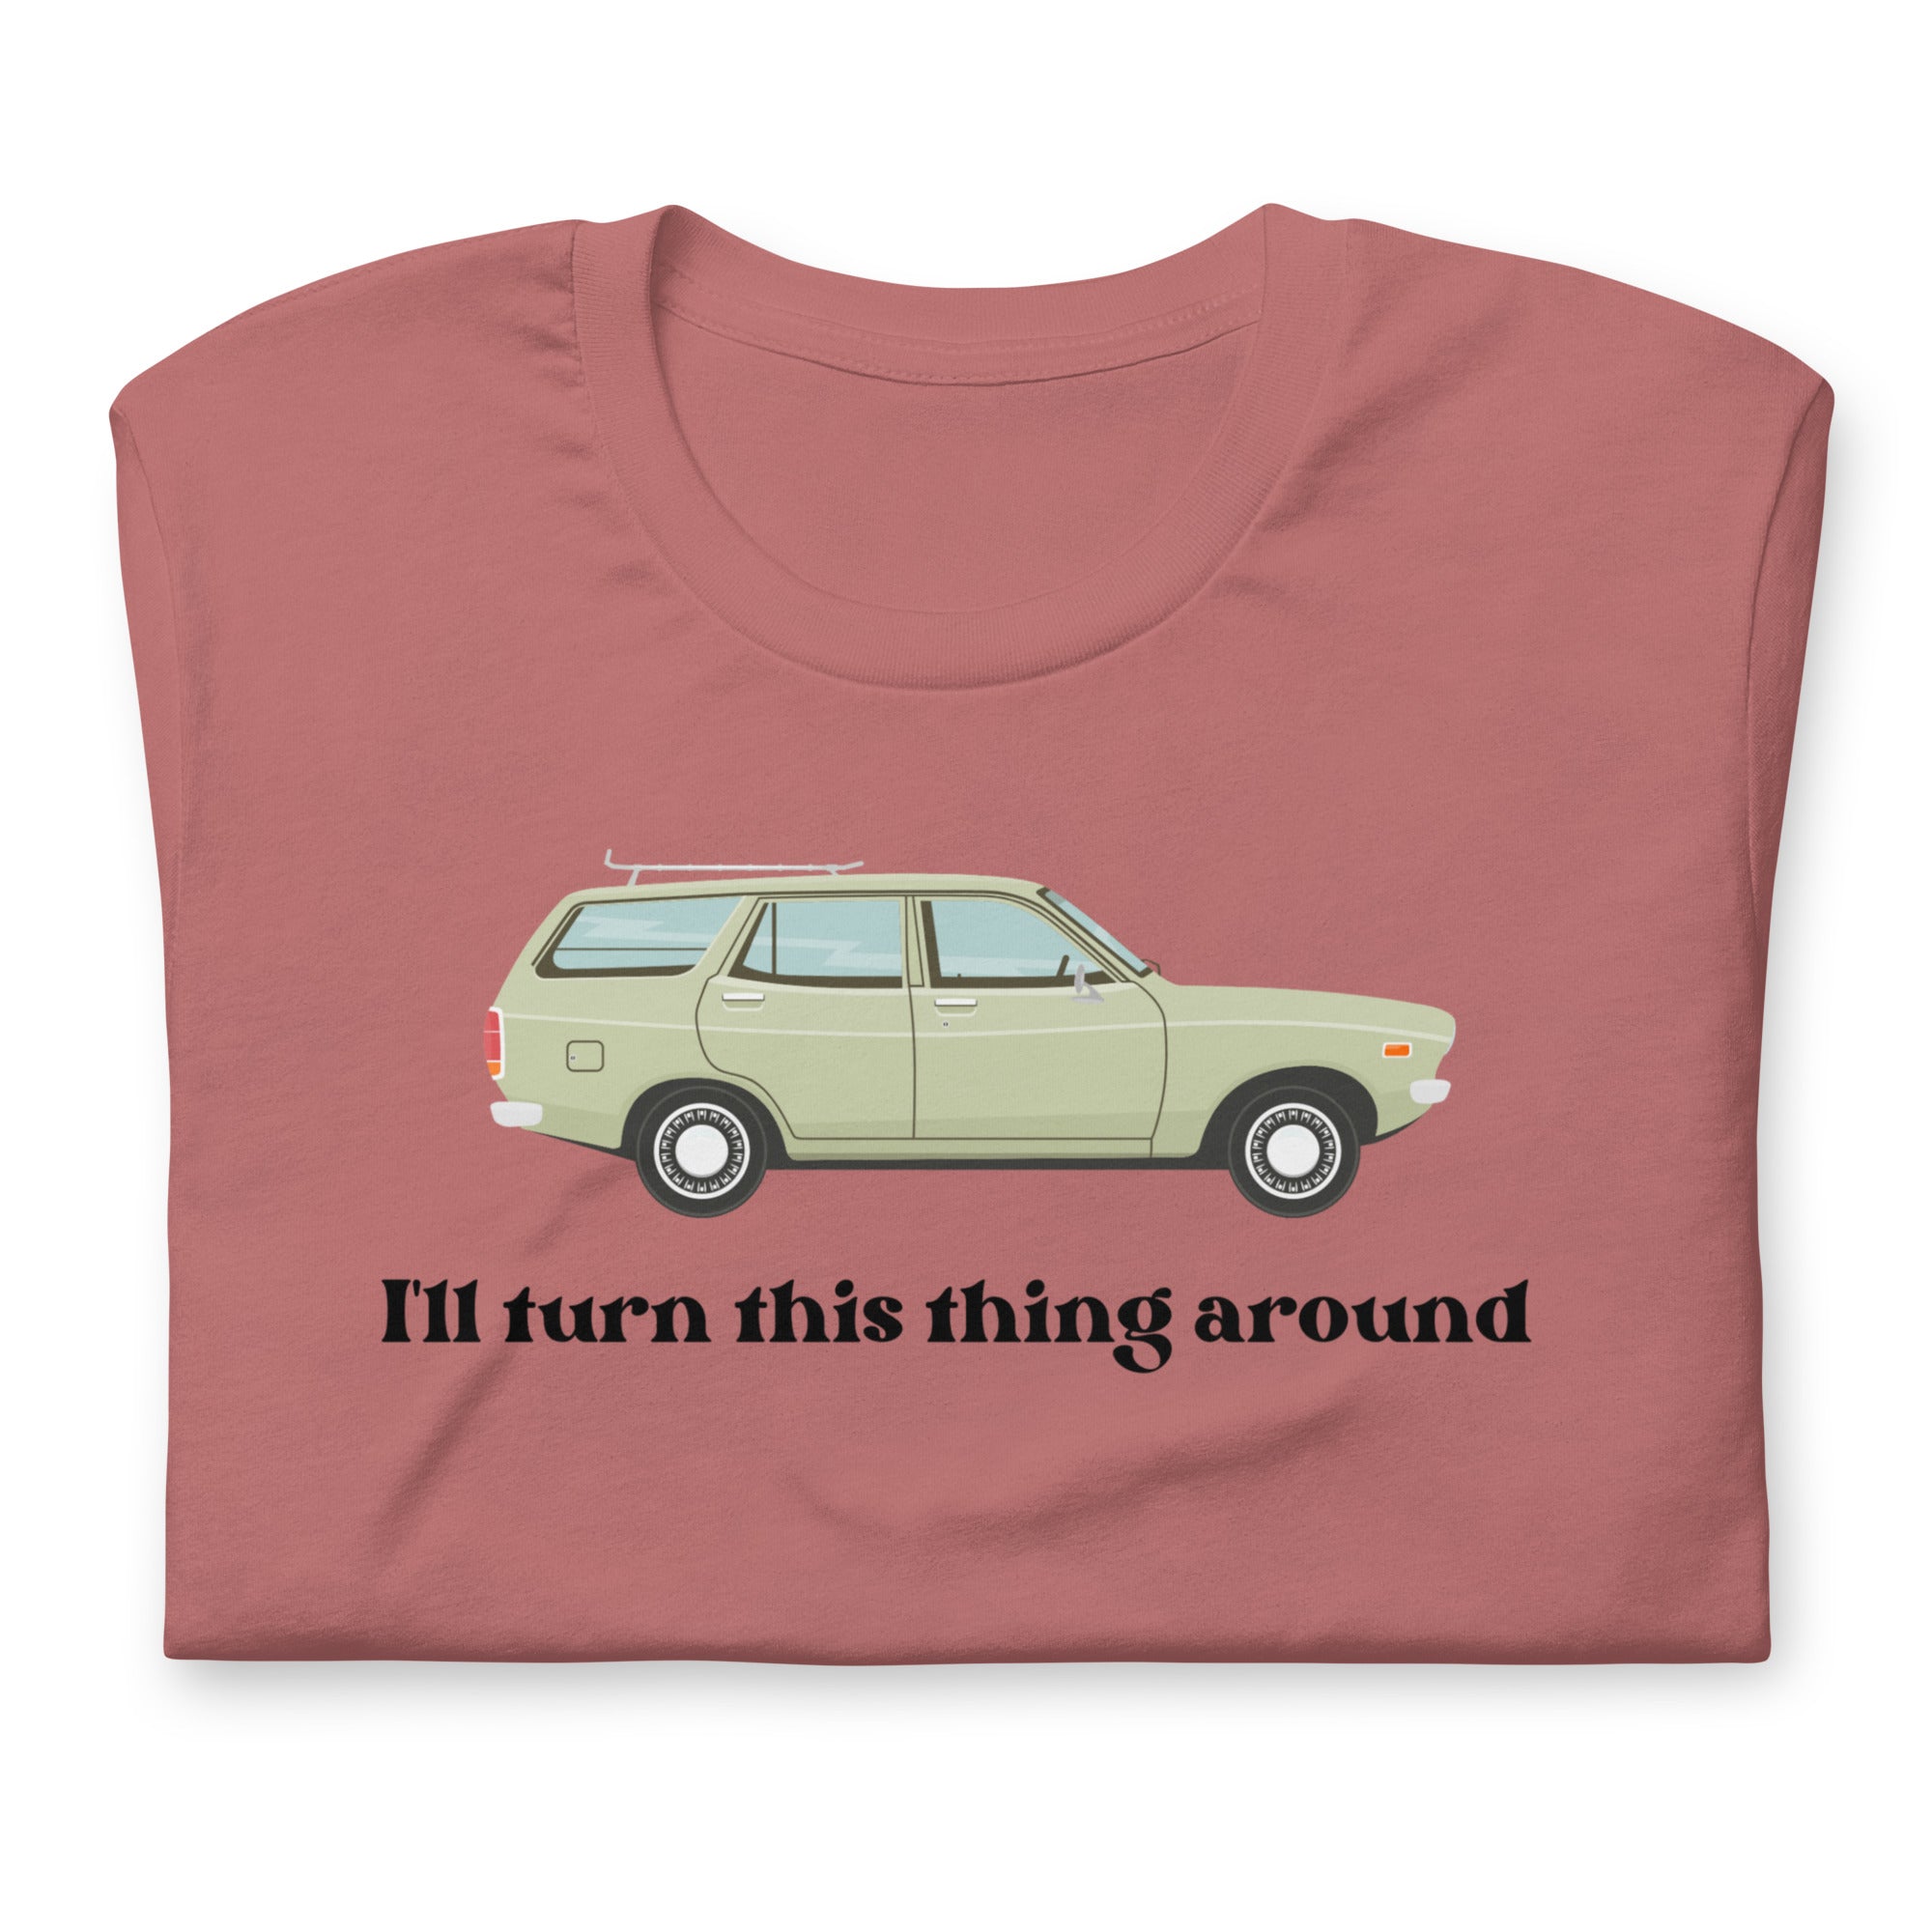 Funny shirt for dad with a station wagon on it.  I'll turn it around